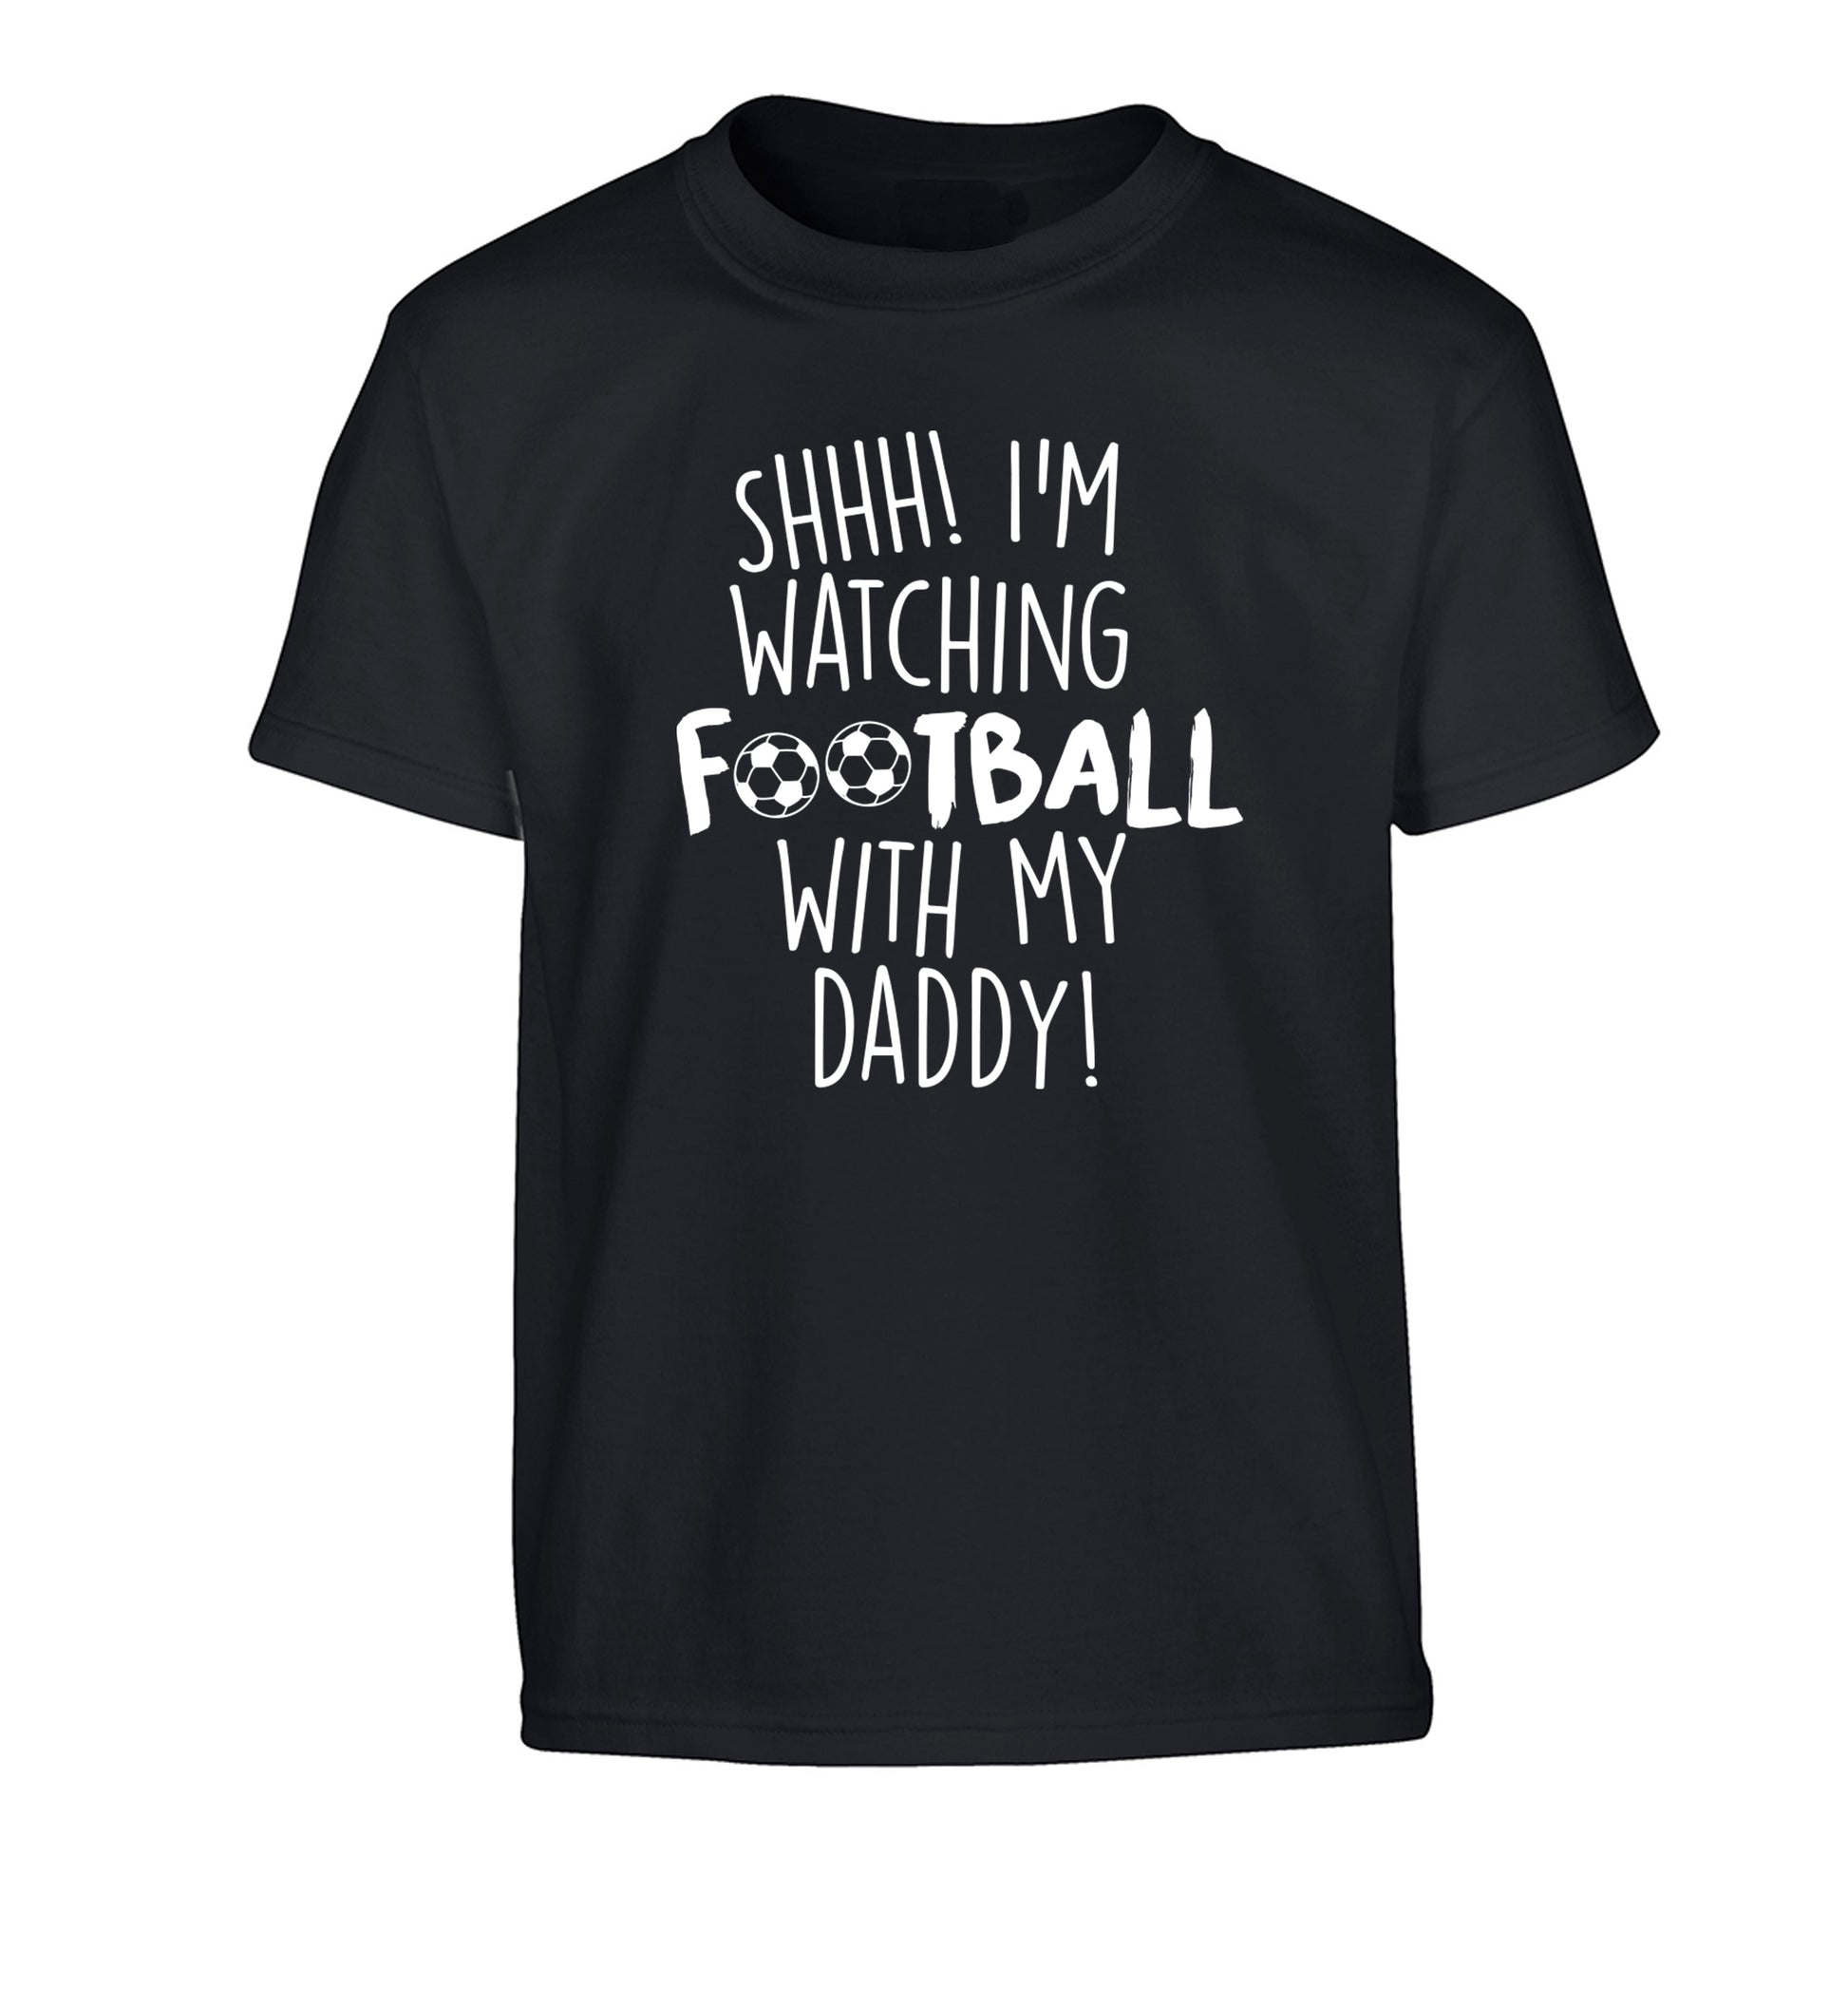 Shhh I'm watching football with my daddy Children's black Tshirt 12-14 Years